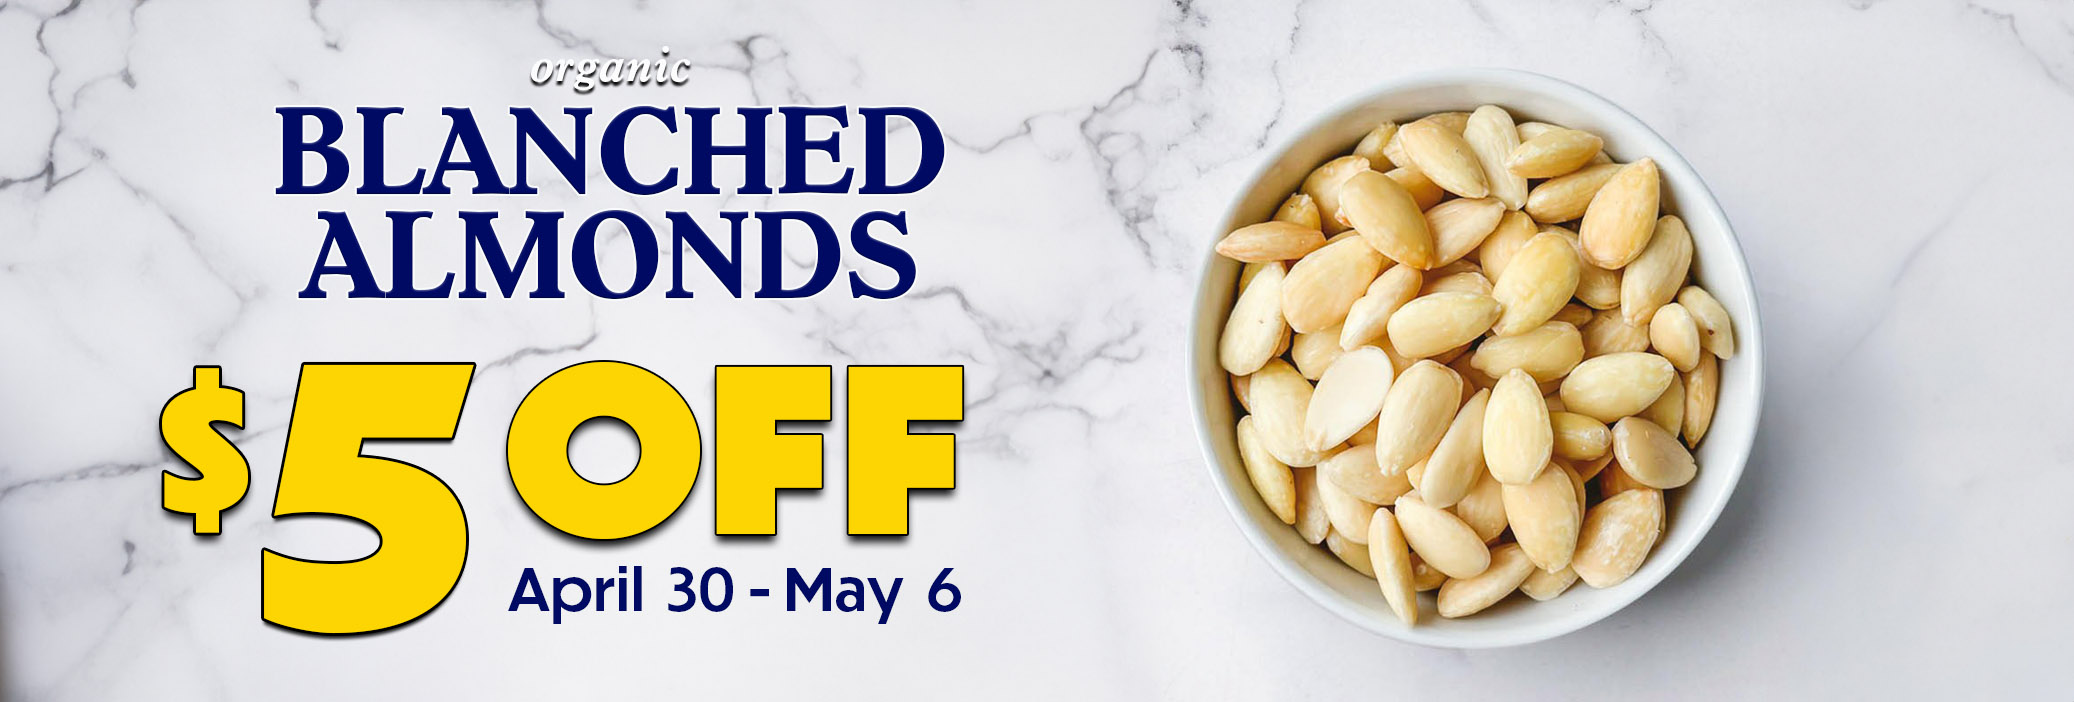 Blanched Almonds Weekly Sale Banner